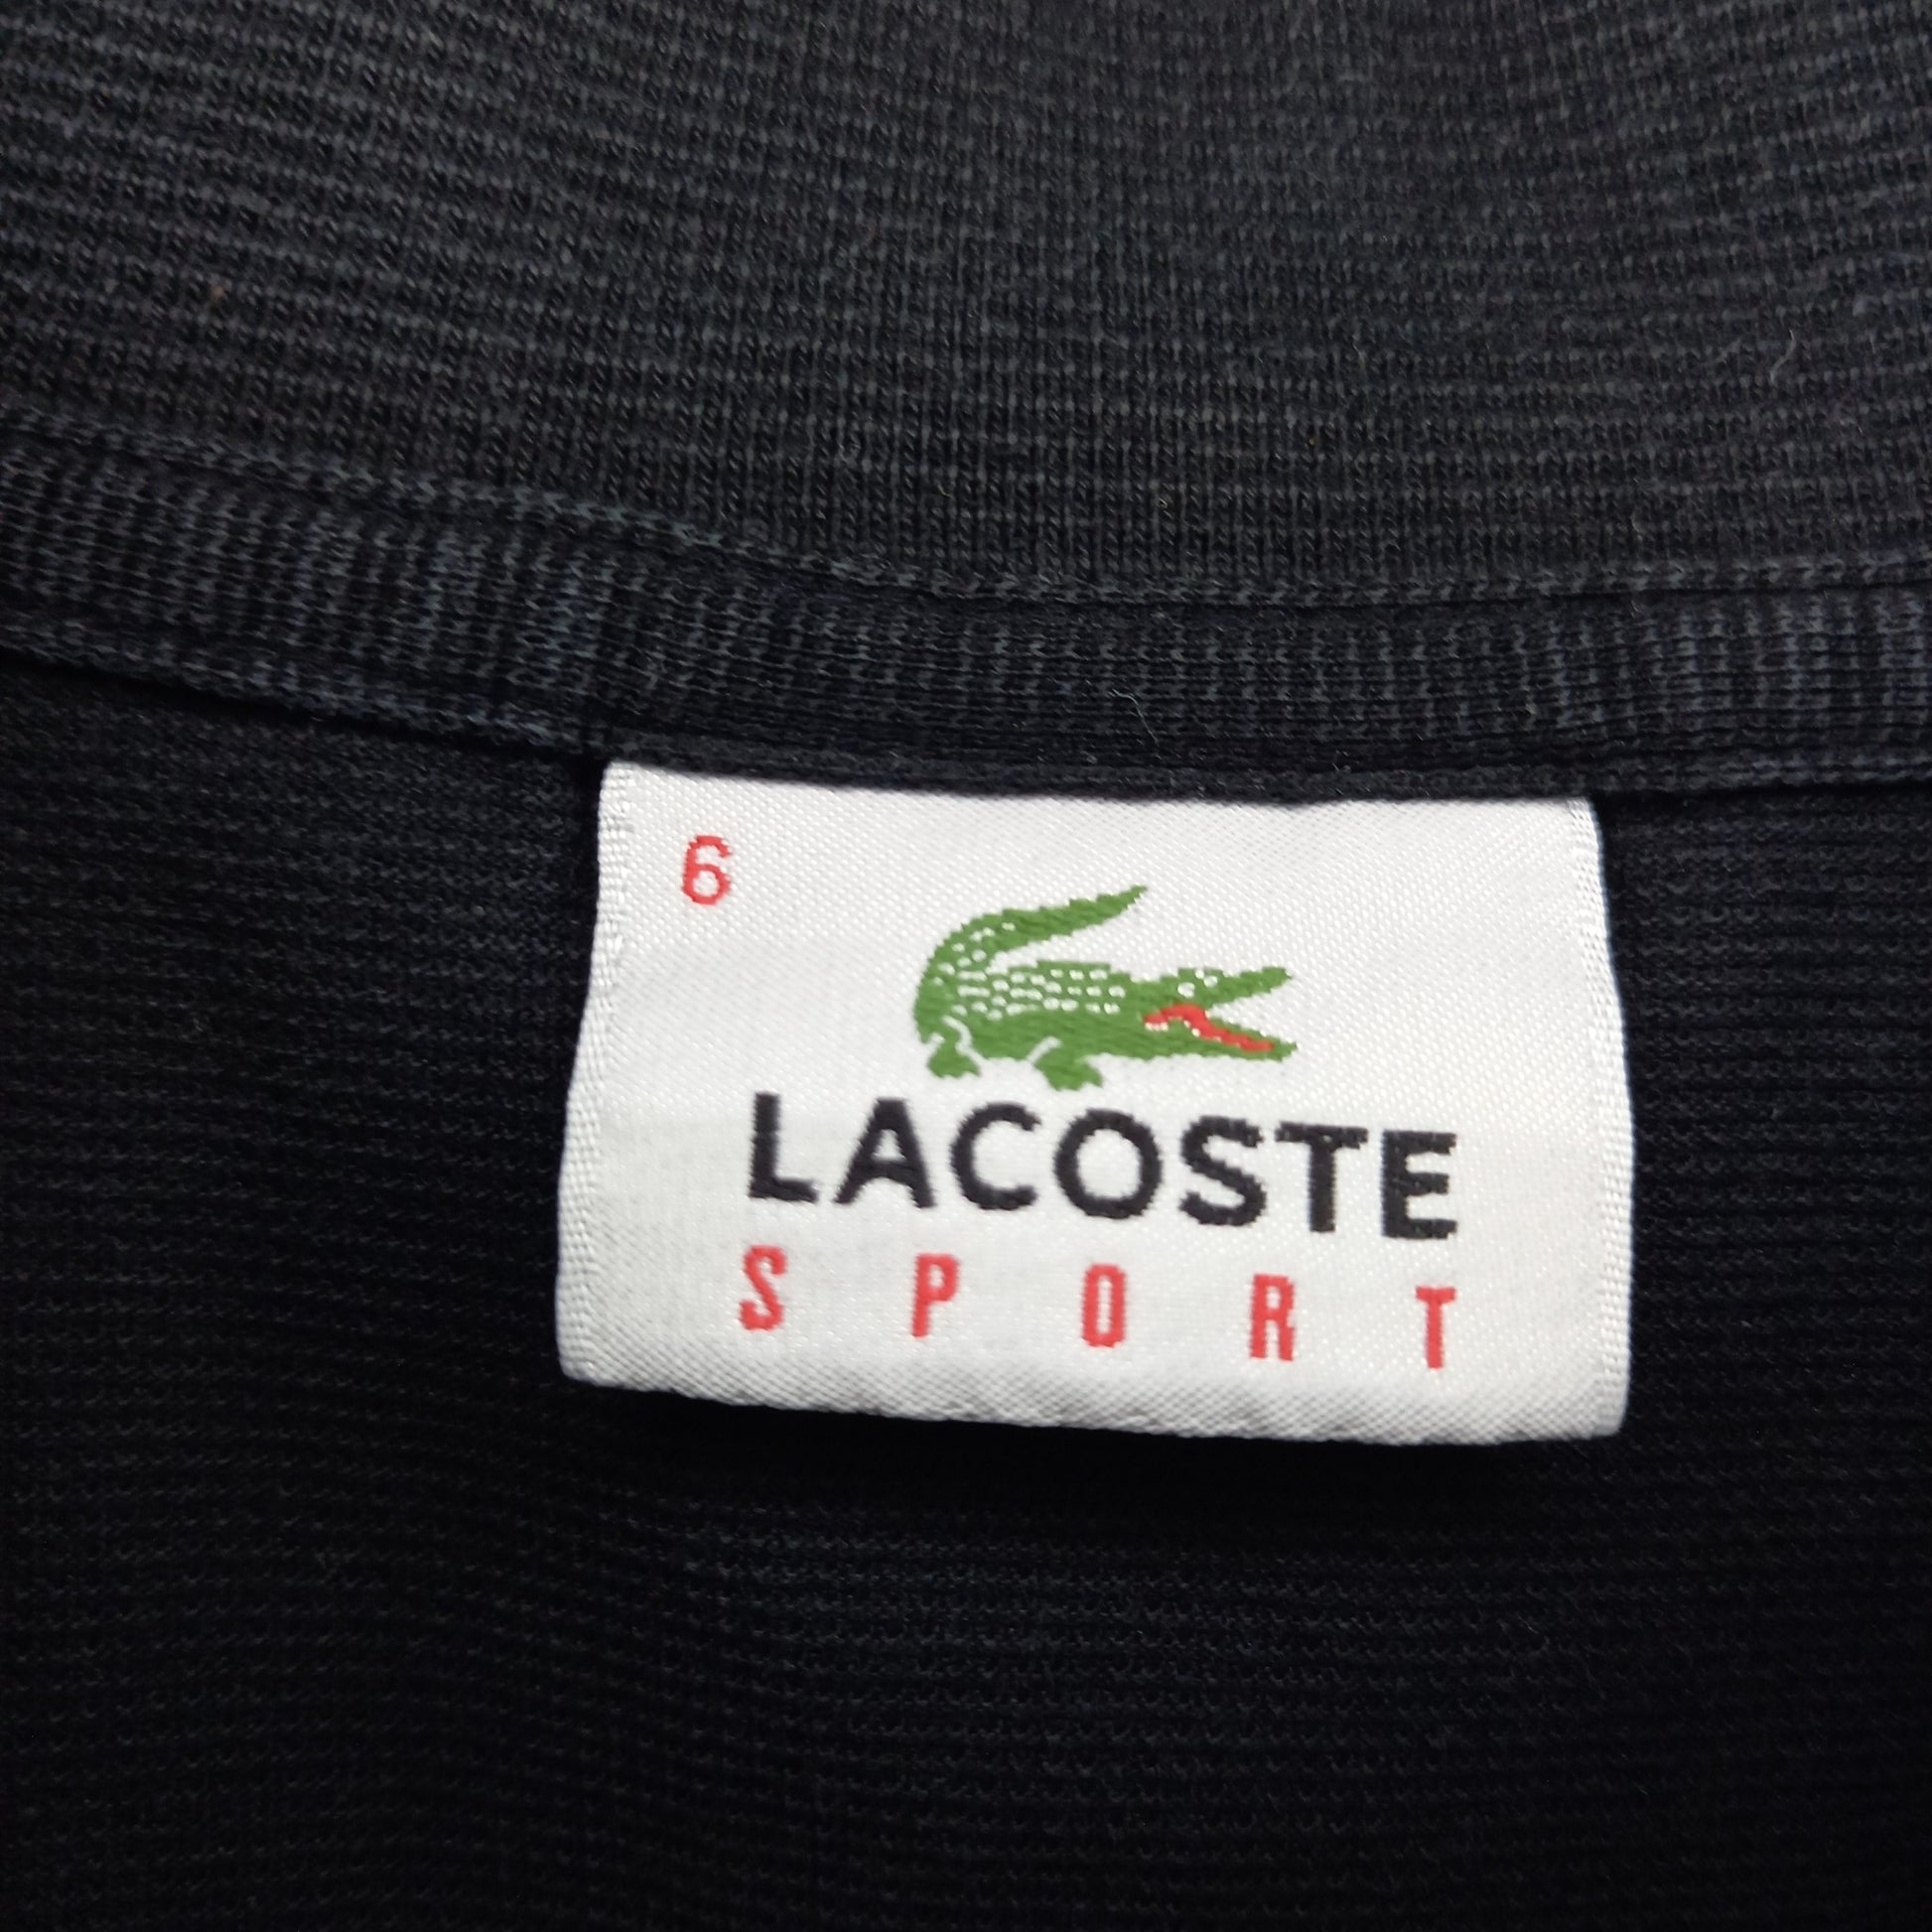 LACOSTE】ポロシャツ/半袖/モノトーン/無地/刺繍/ロゴ/ビッグ/新品